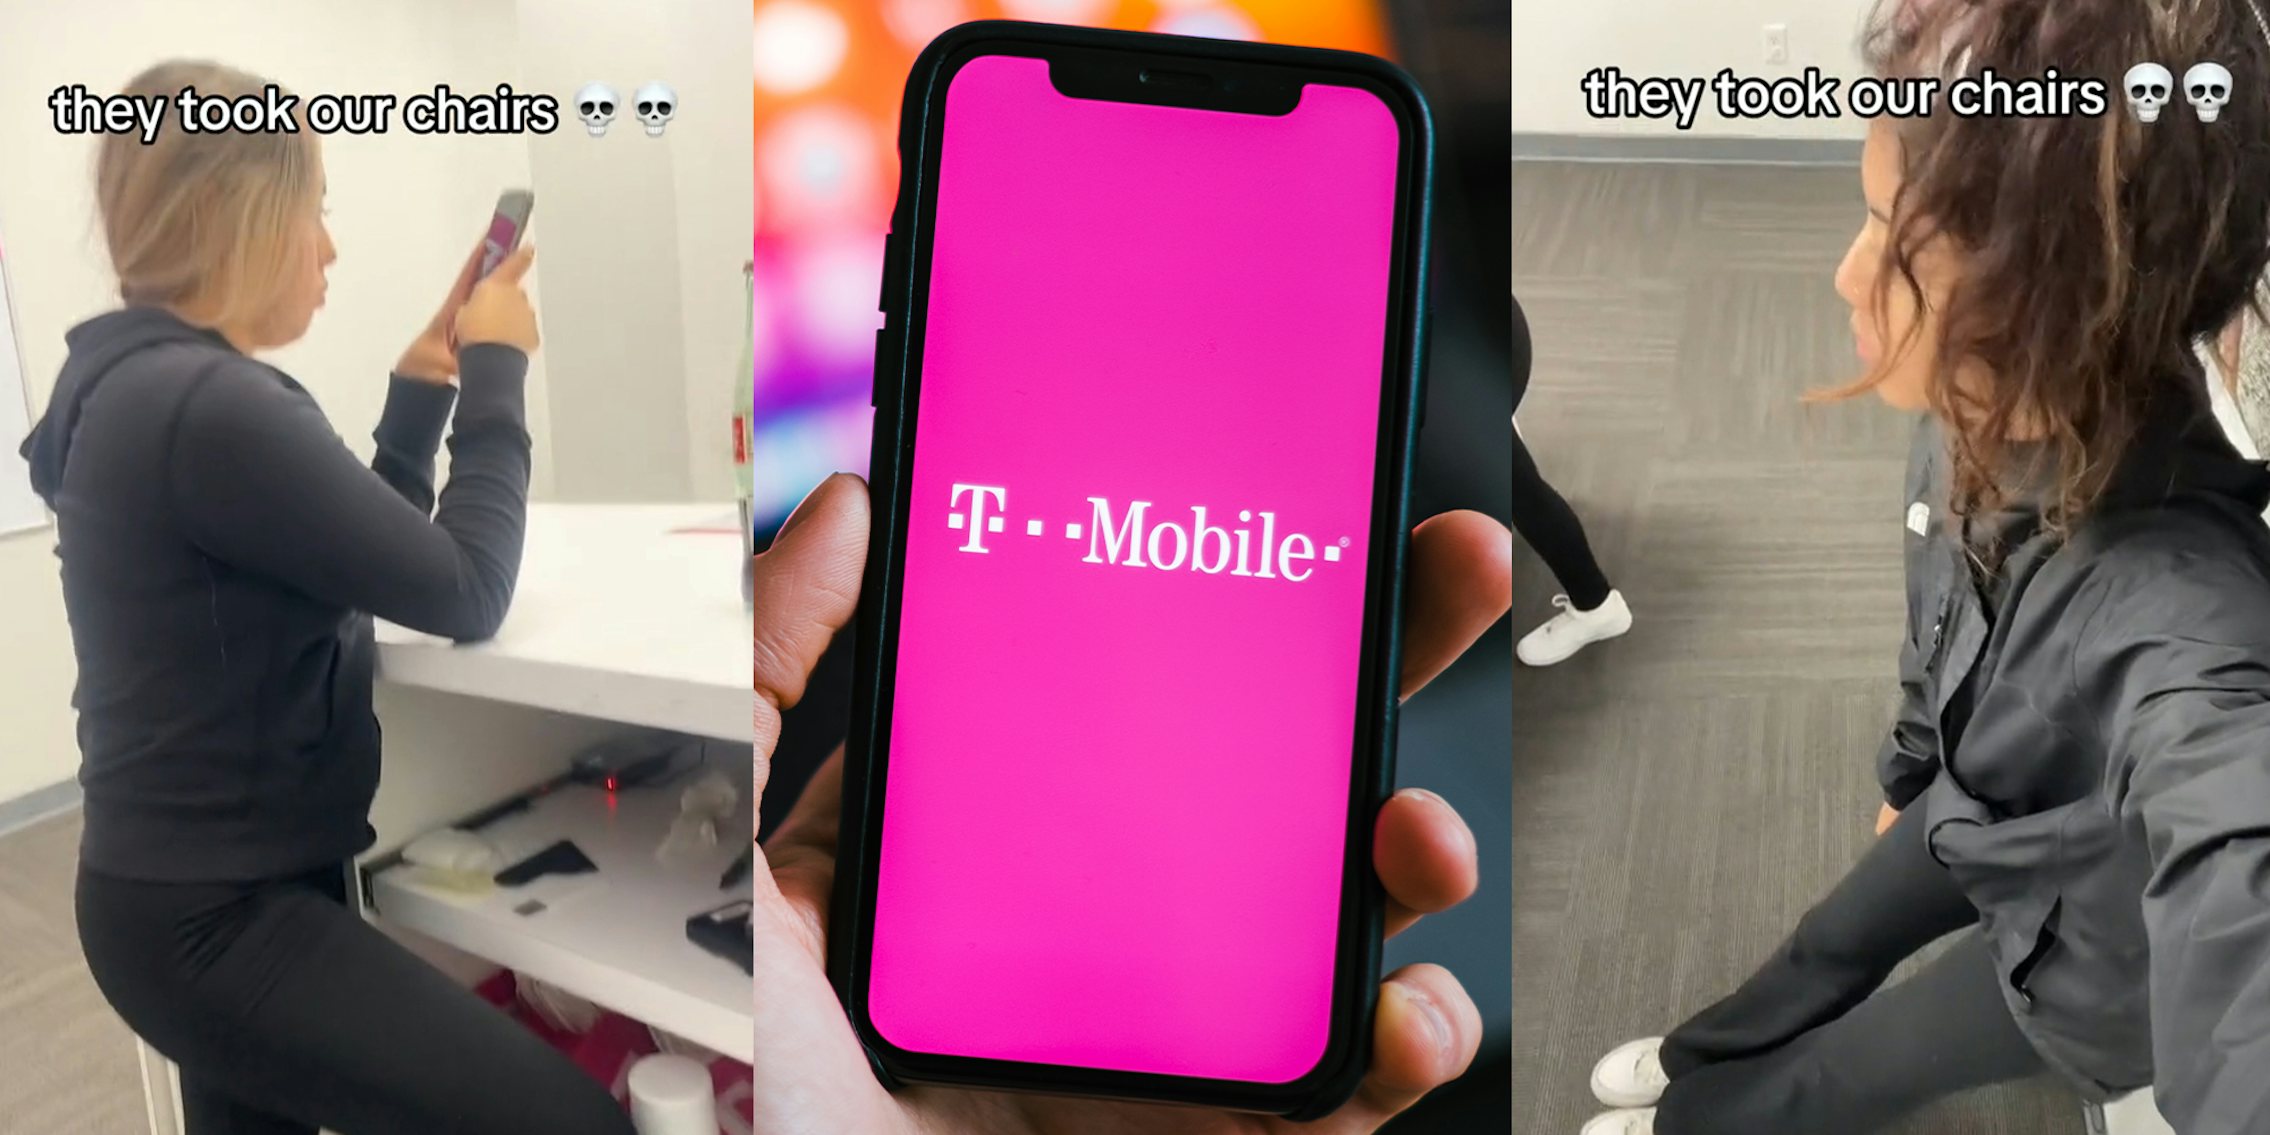 T-Mobile worker say they got their chairs taken away from them